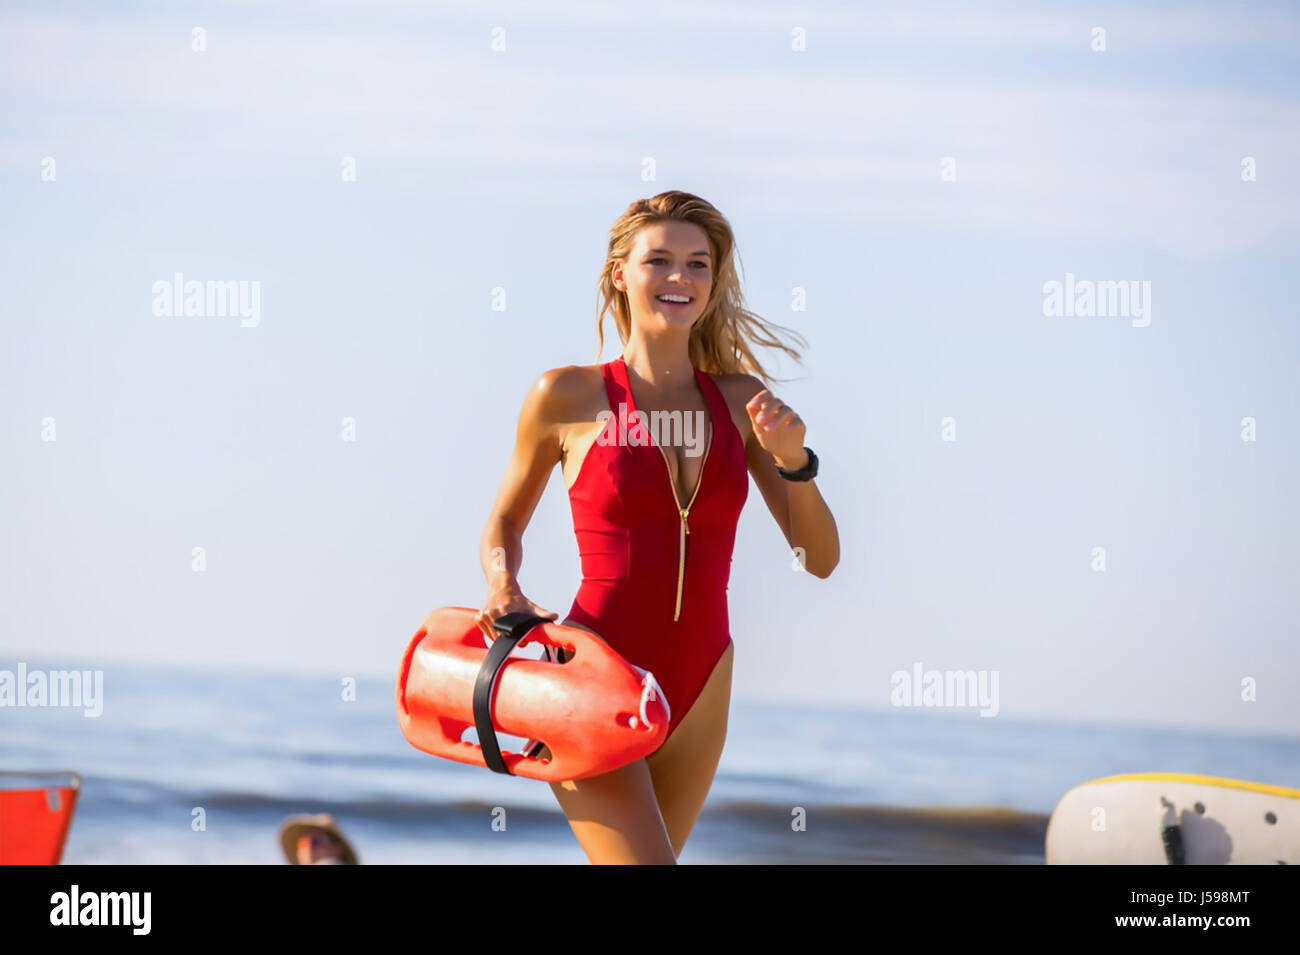 BAYWATCH 2017 Paramount film avec Kelly Rohrbach Banque D'Images